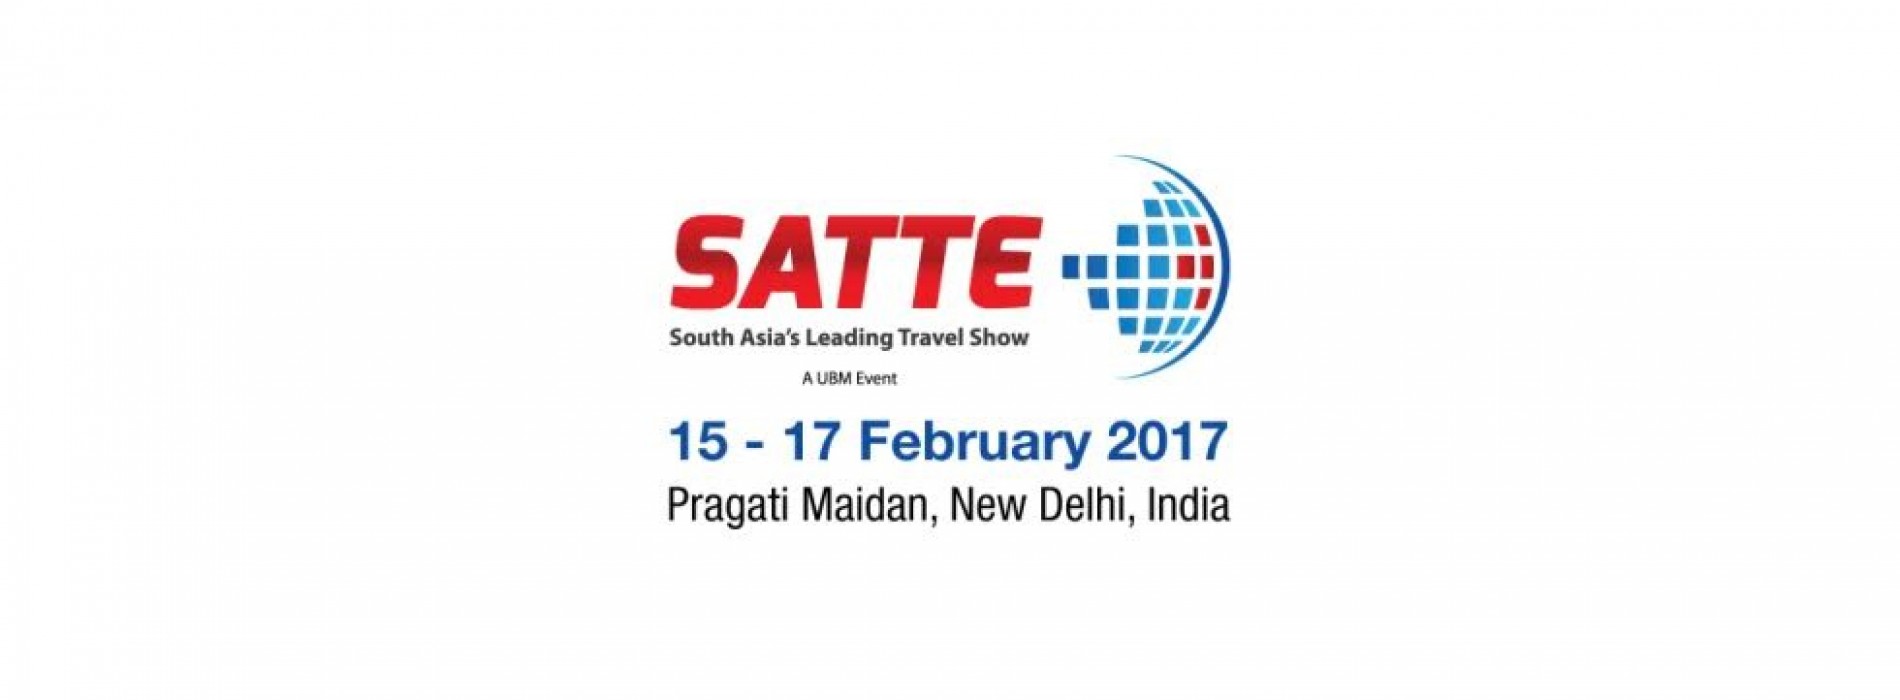 A wealth of renowned Travel and Tourism brands to embark on the SATTE 2017 bandwagon